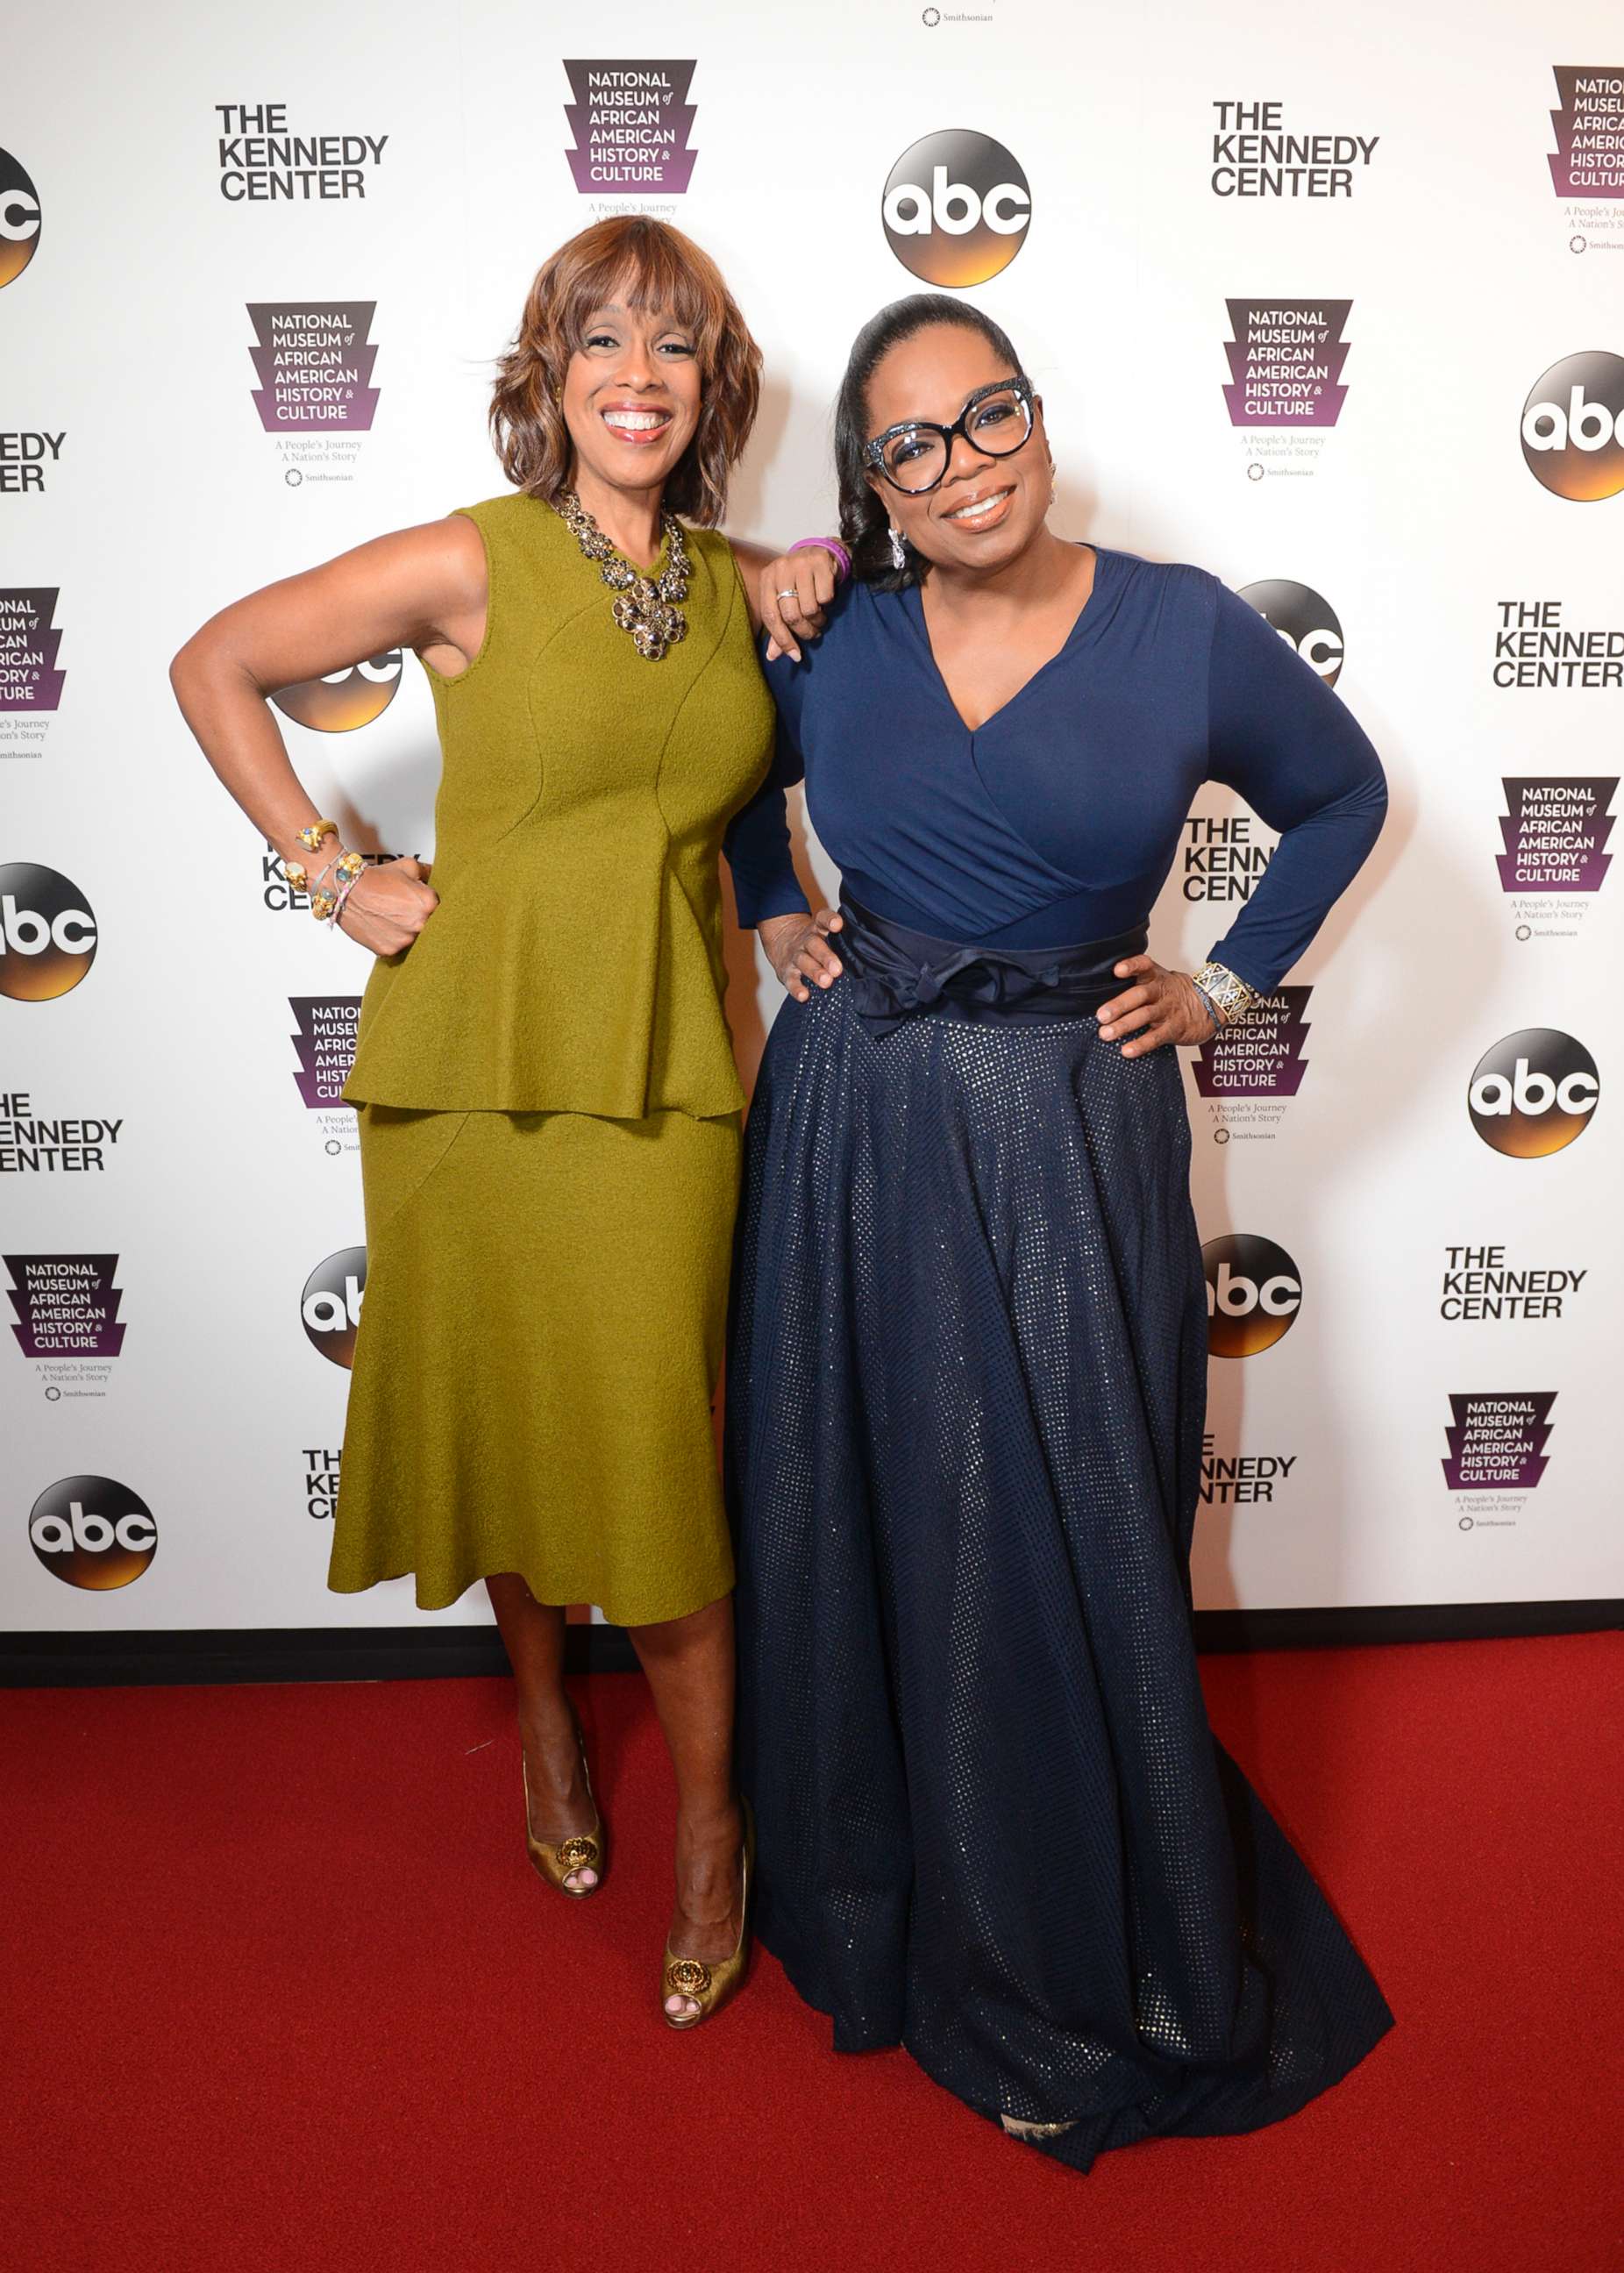 PHOTO: Gayle King and Oprah Winfrey at the opening of the Smithsonian's new National Museum of African American History and Culture, taped at the Kennedy Center in Washington, Sept. 23, 2016. 